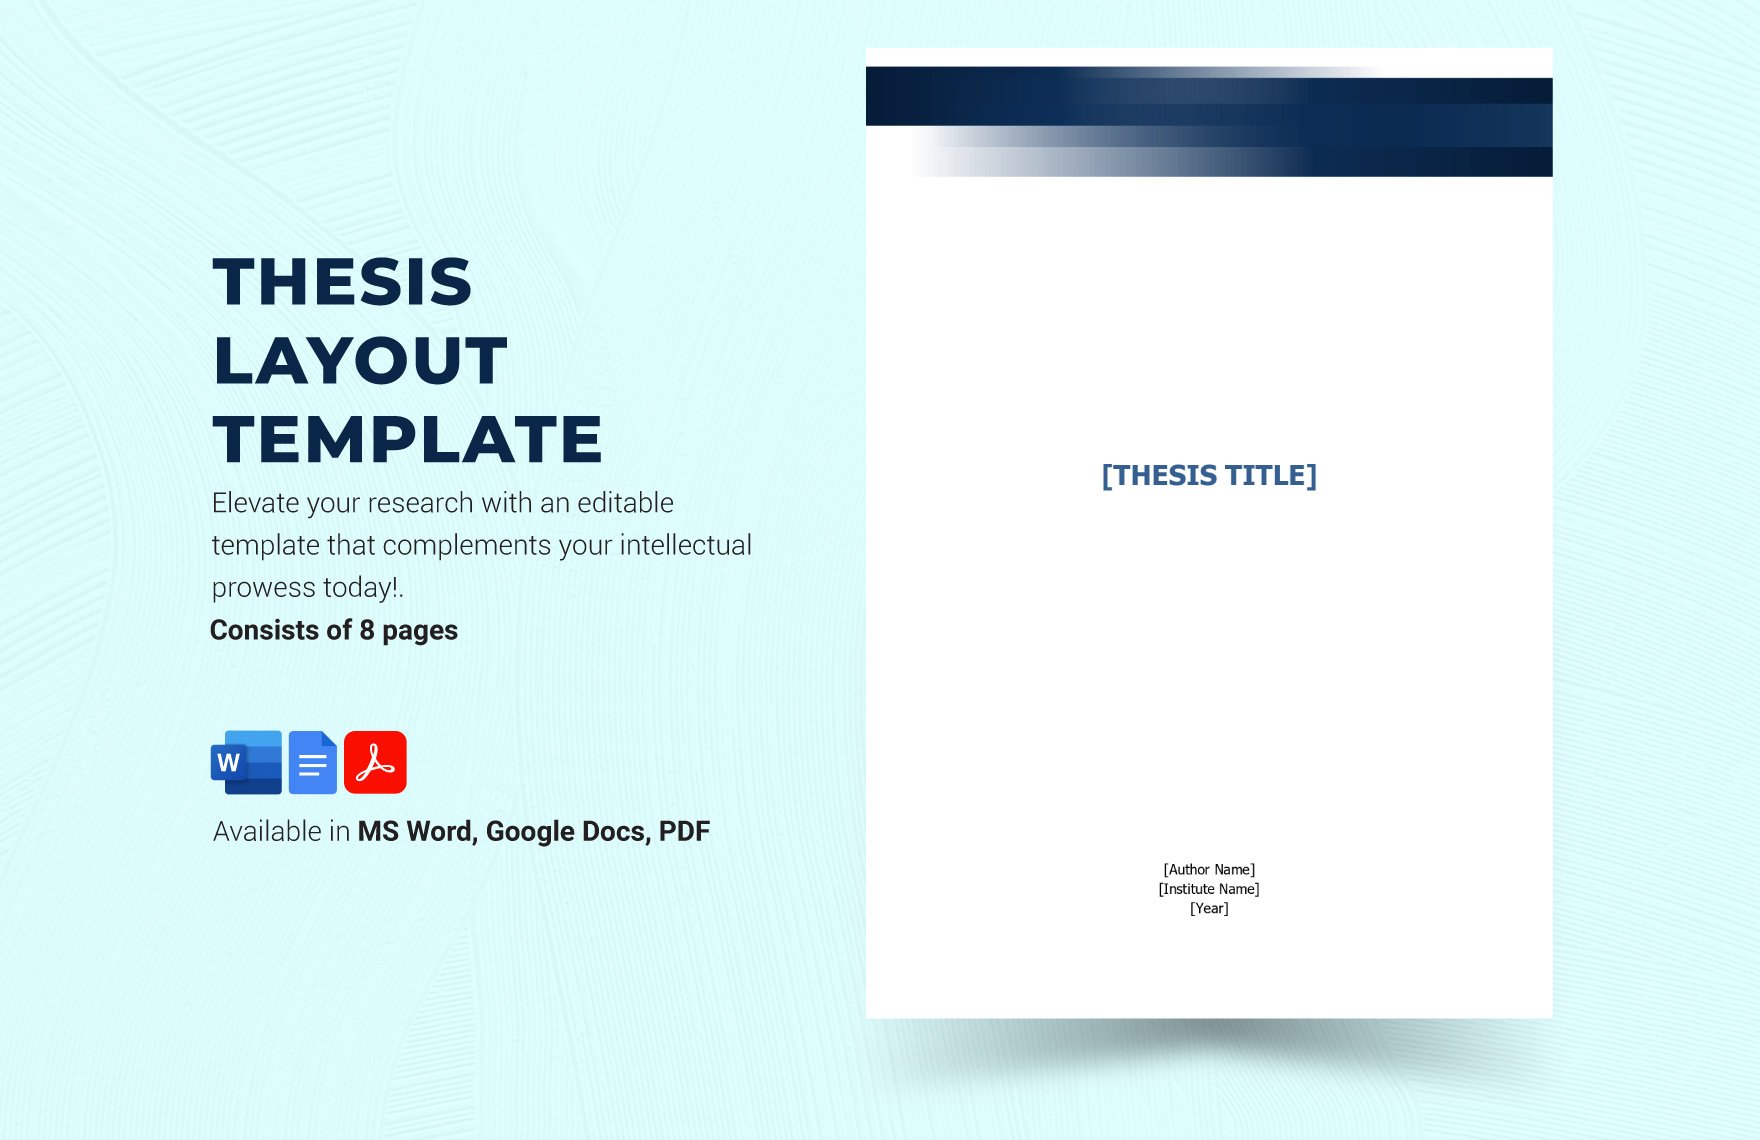 Free Thesis Layout Template in Word, Google Docs, PDF